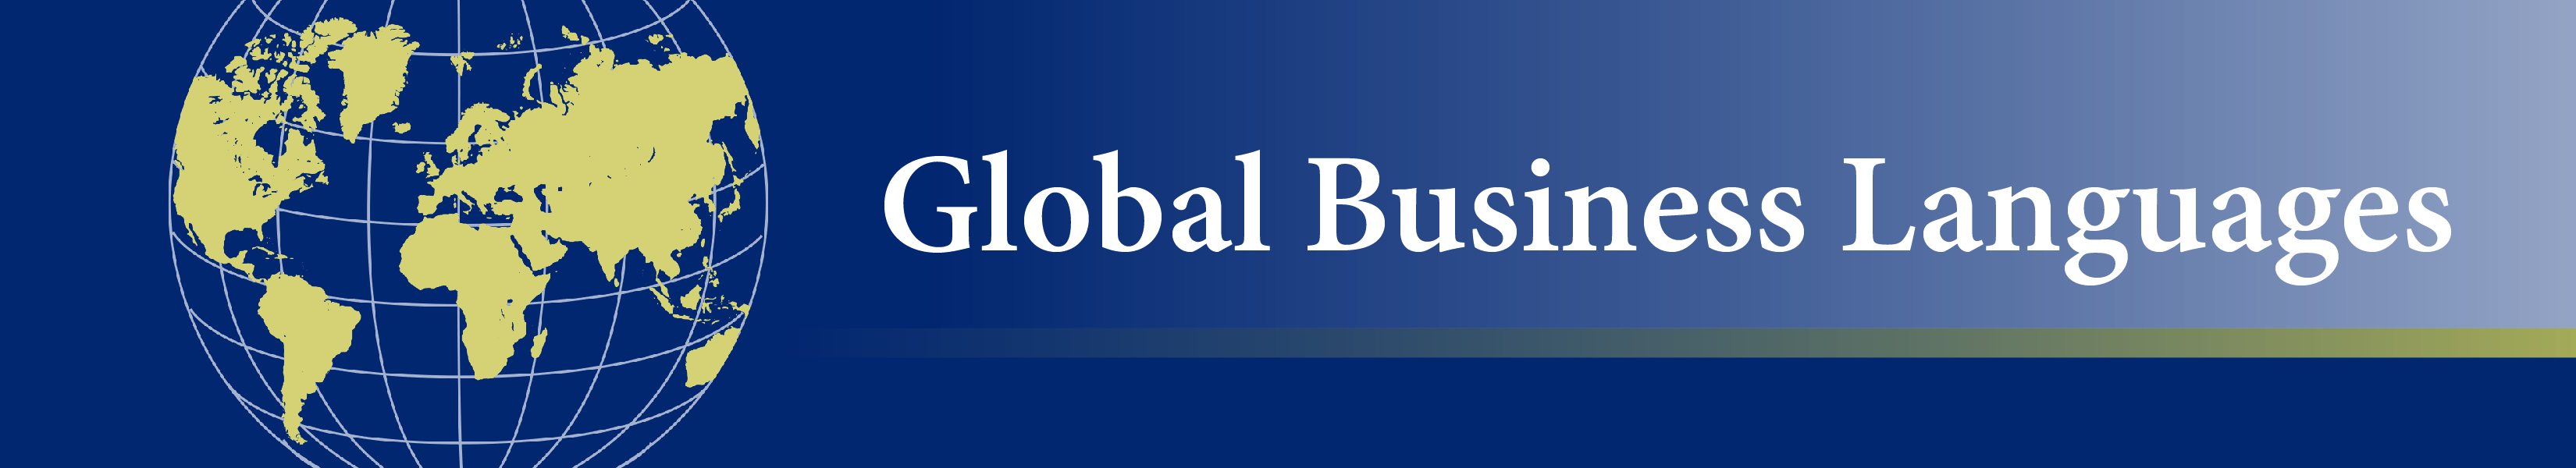 Global Business Languages